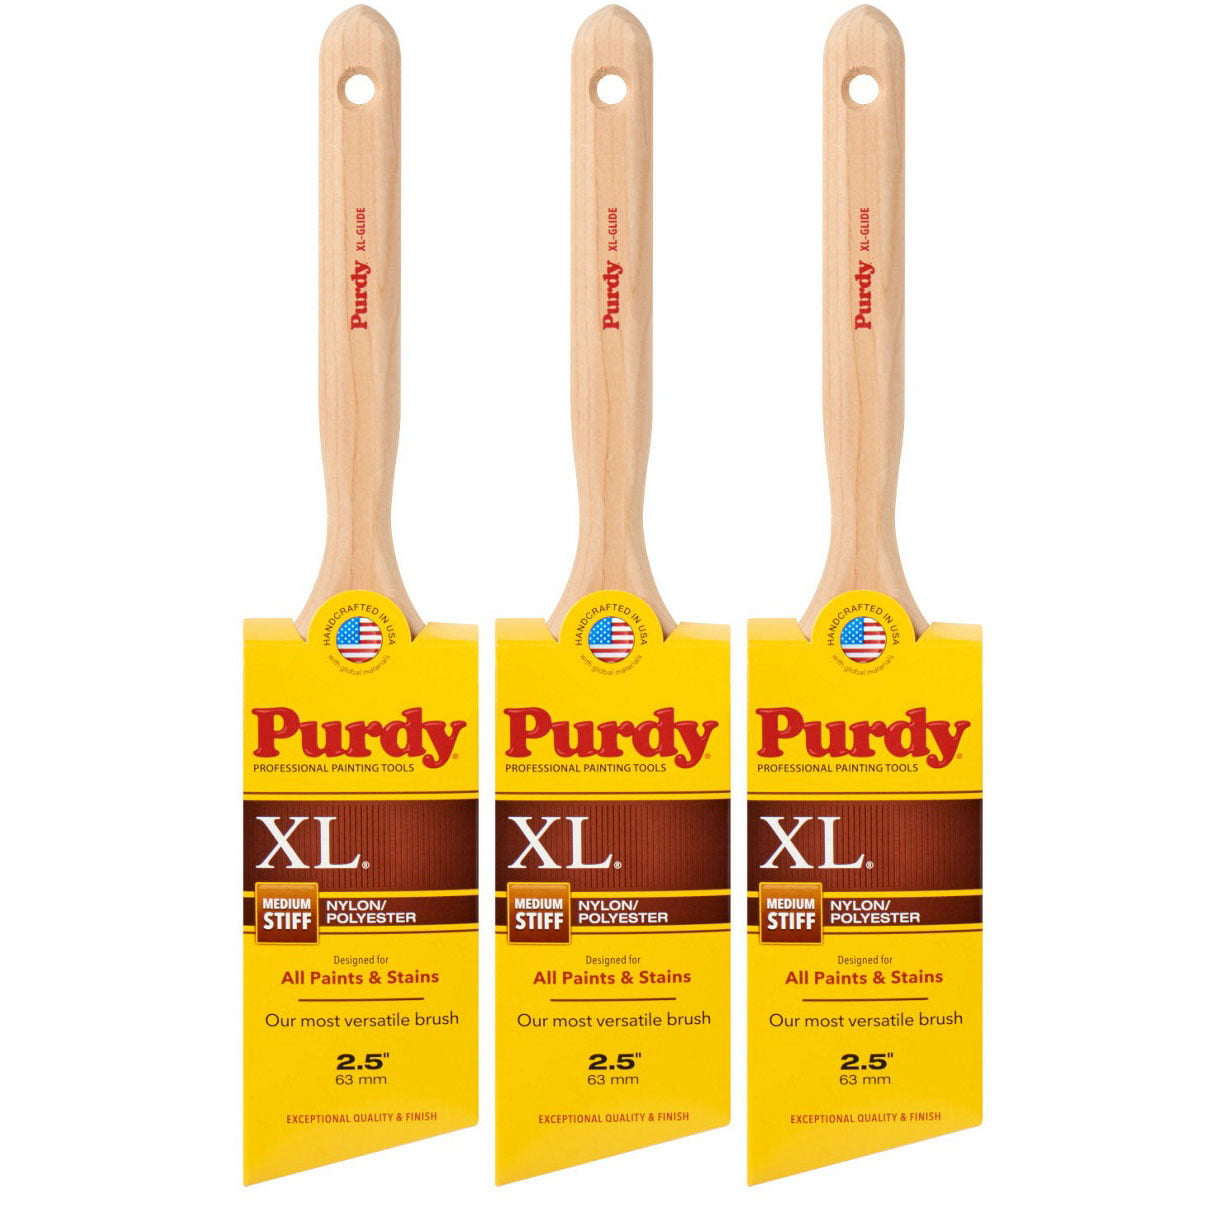 Purdy XL Dale 3 In. Angular Trim Paint Brush 144080330, 1 - Foods Co.